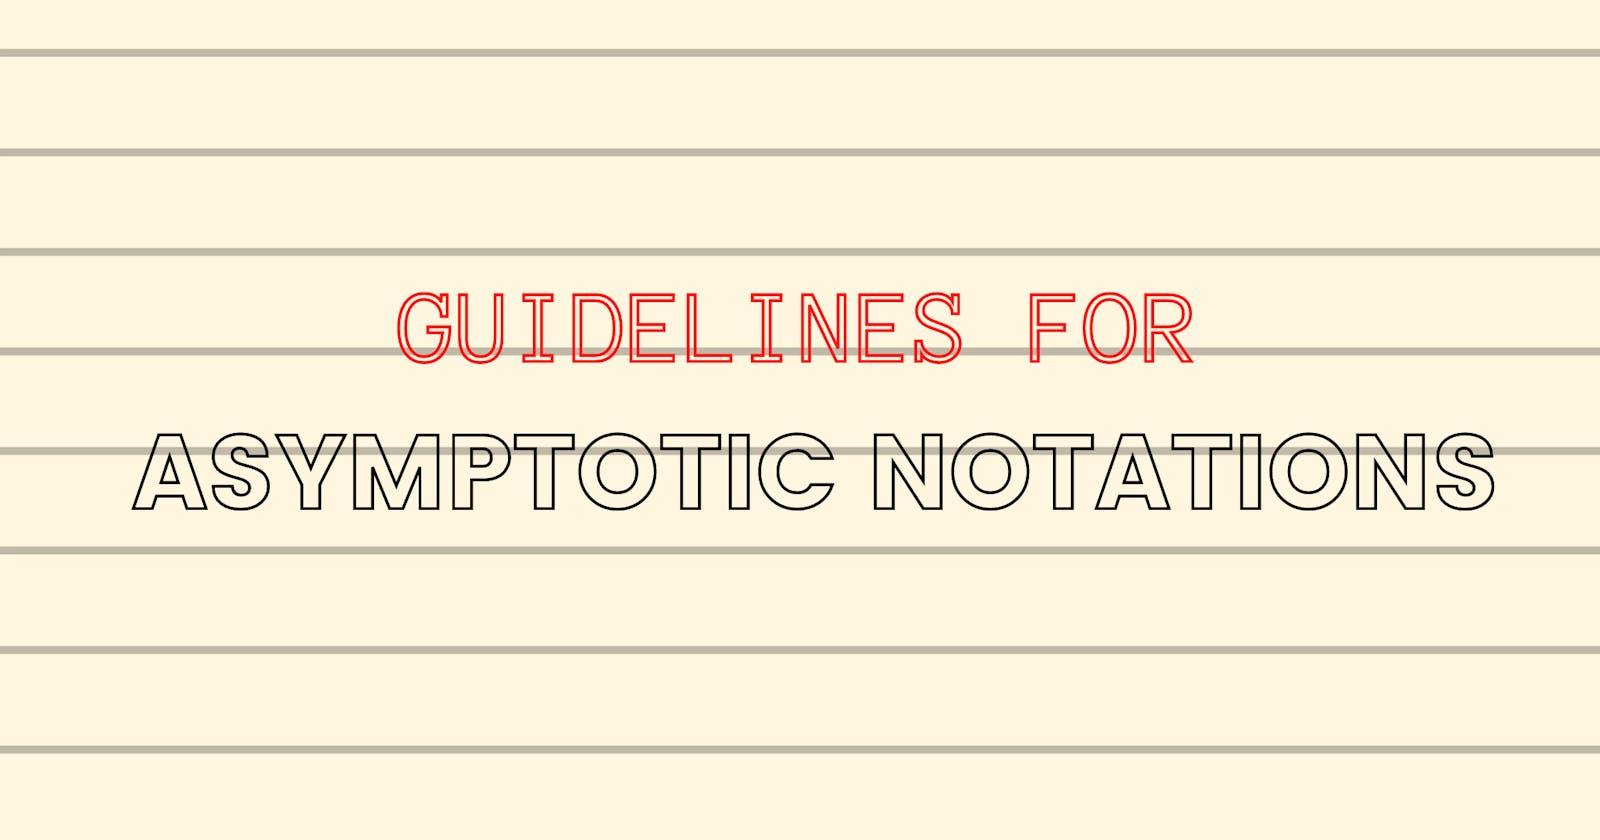 Guidelines for Asymptotic Notations